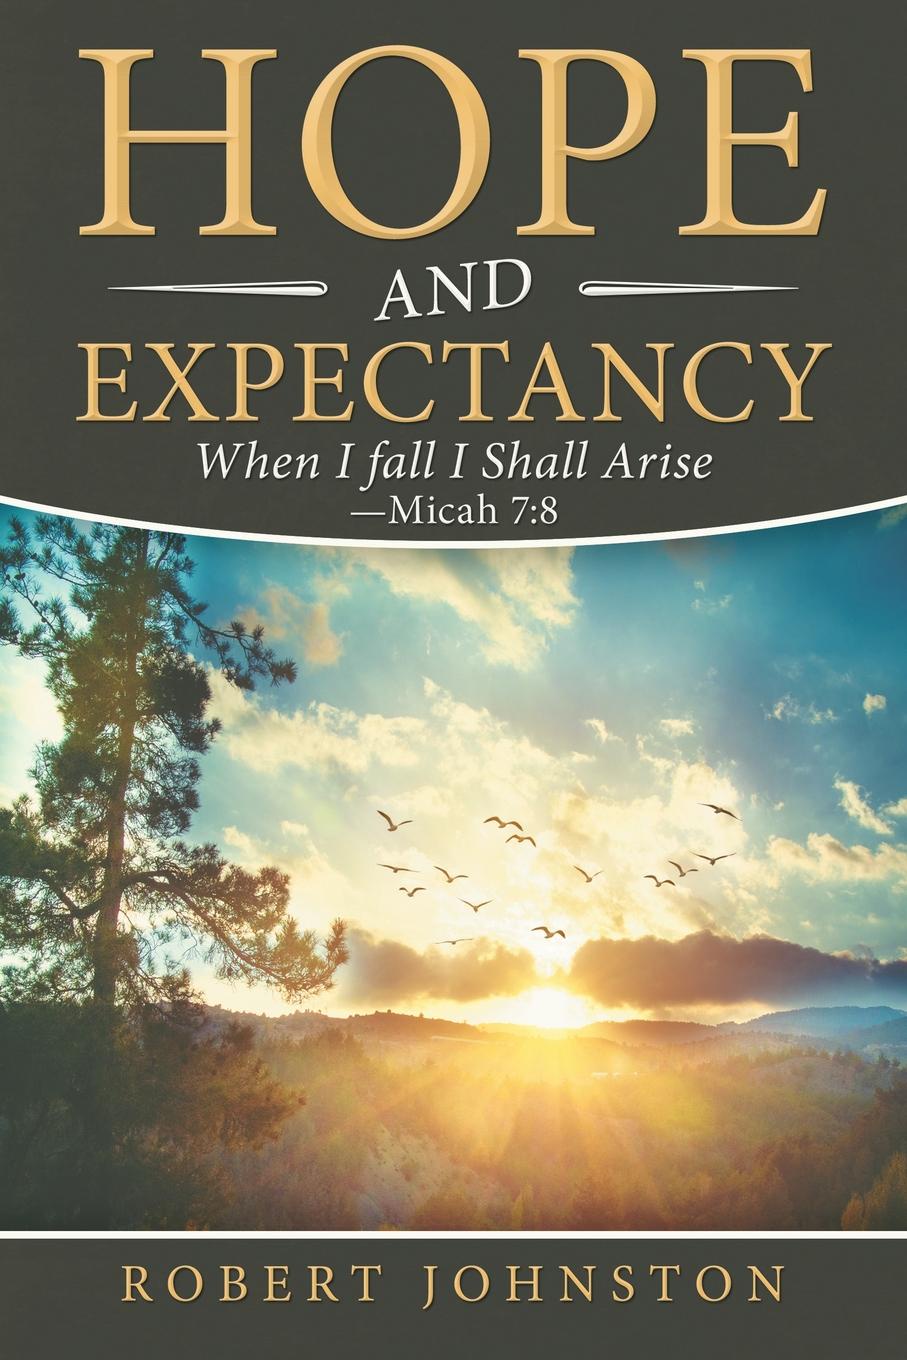 Hope and Expectancy. When I Fall I Shall Arise - Micah 7:8